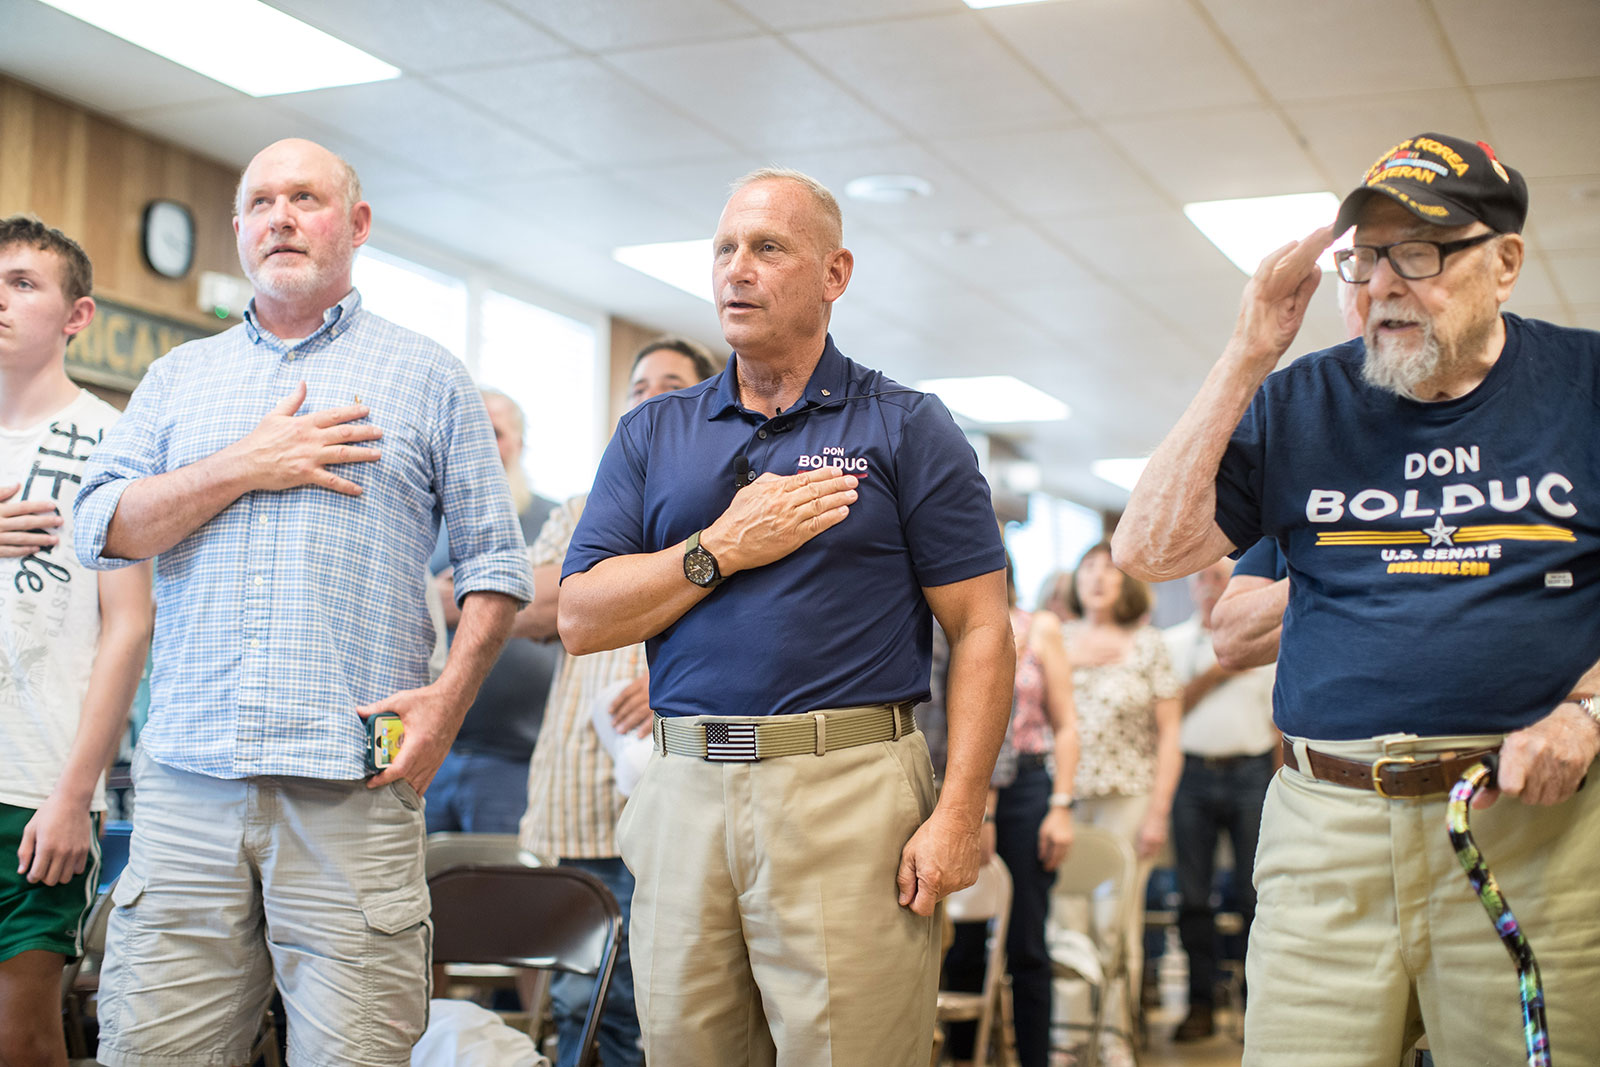 Don Bolduc, center, stands with supporters during the Pledge of Allegiance at a town hall event in Laconia, New Hampshire on September 10.